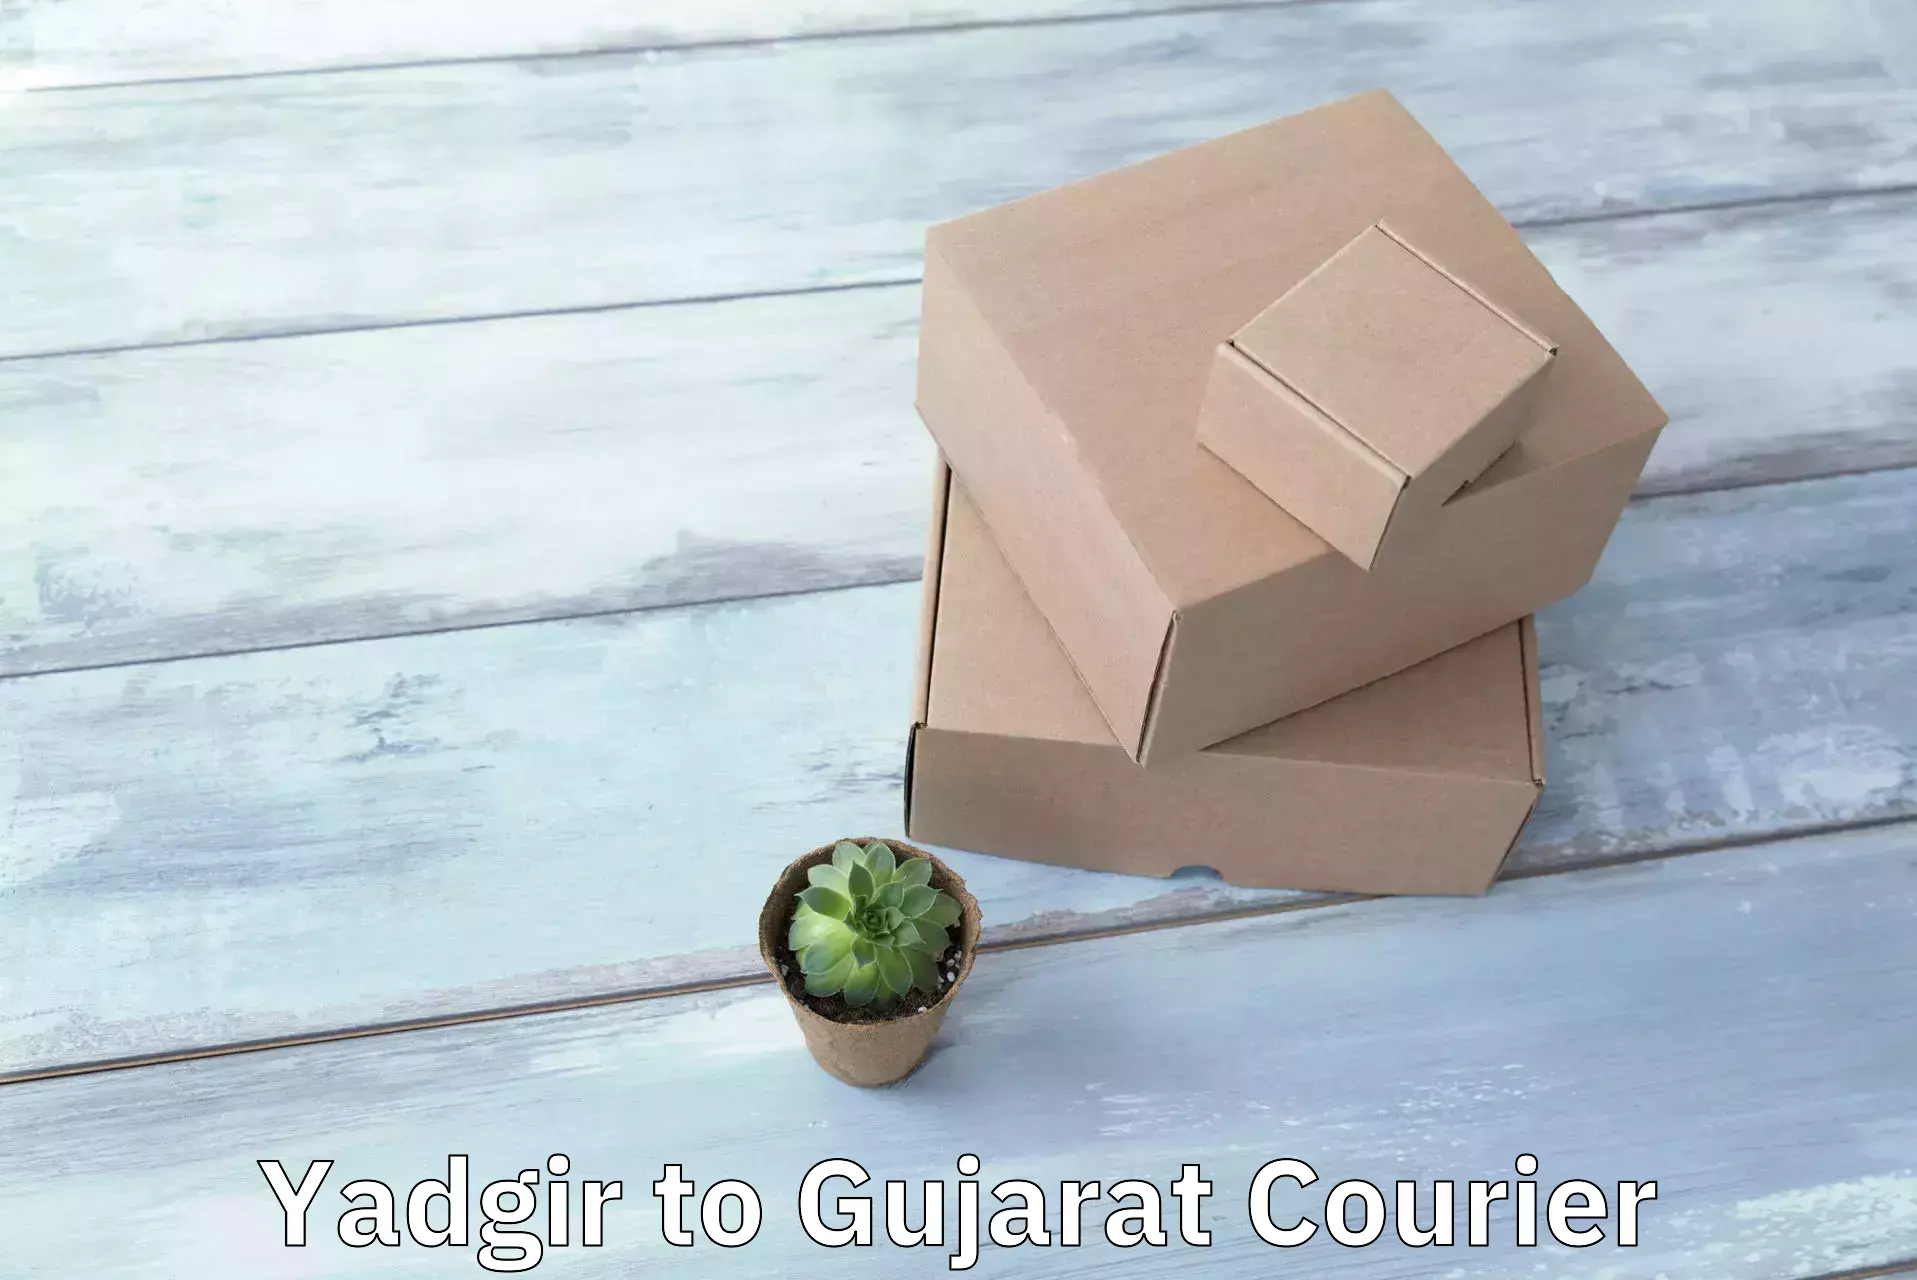 Sustainable shipping practices Yadgir to Gujarat